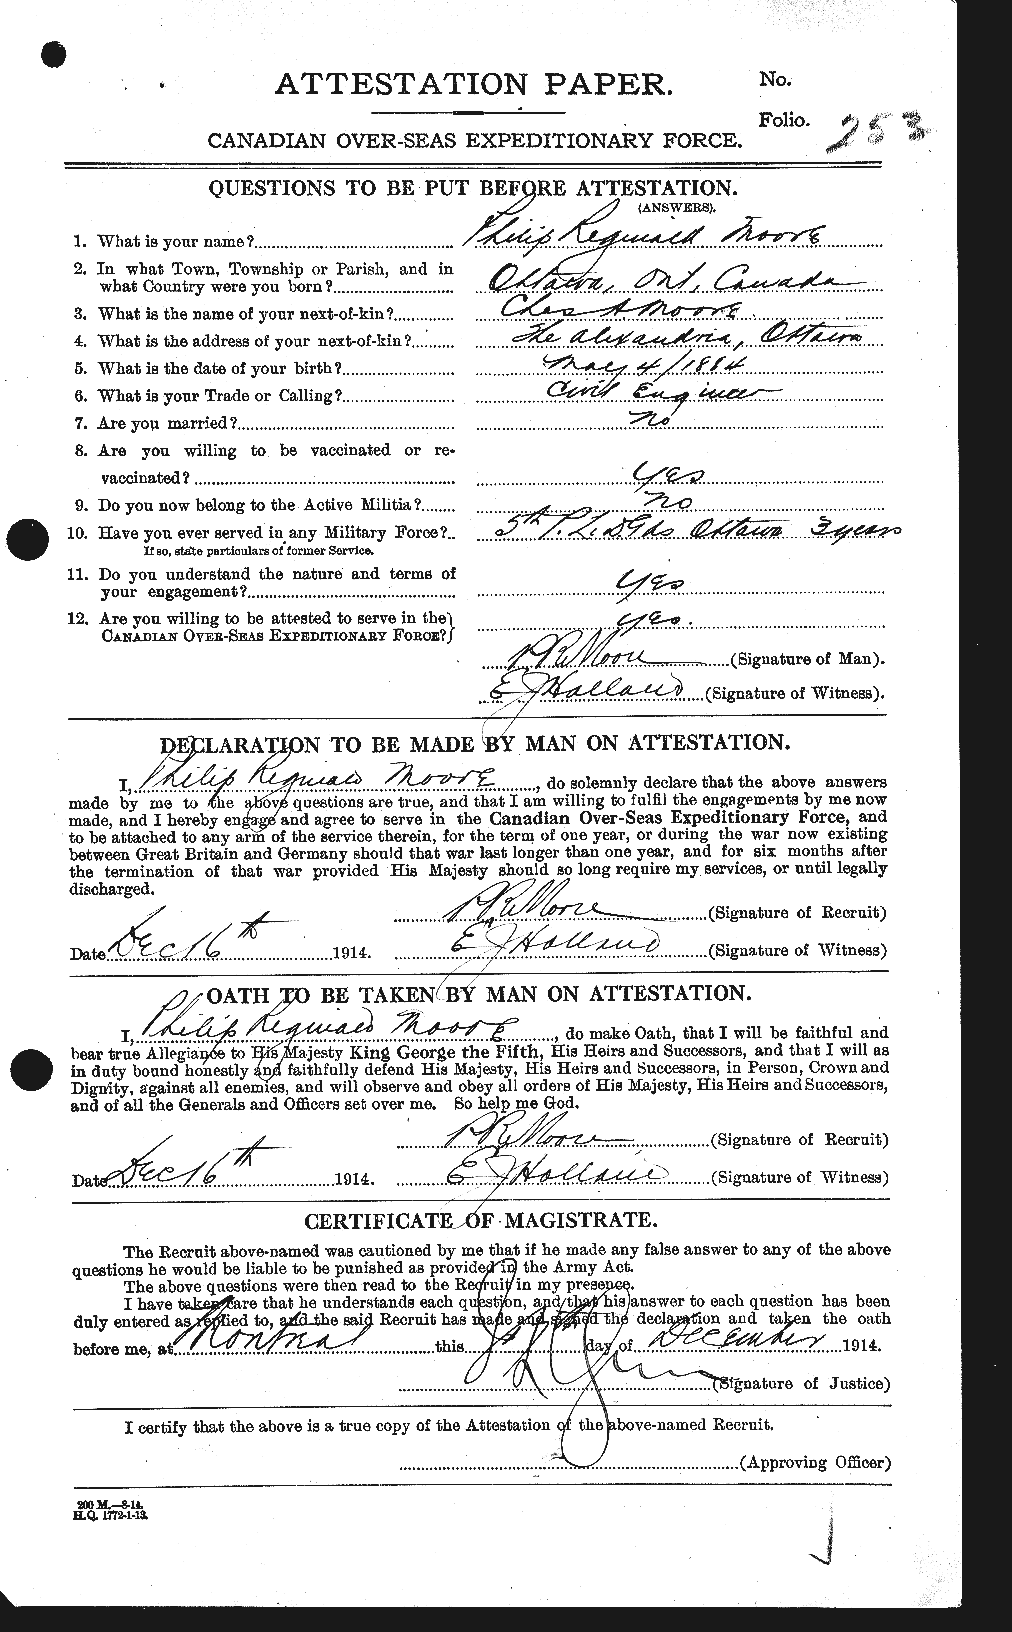 Personnel Records of the First World War - CEF 503502a